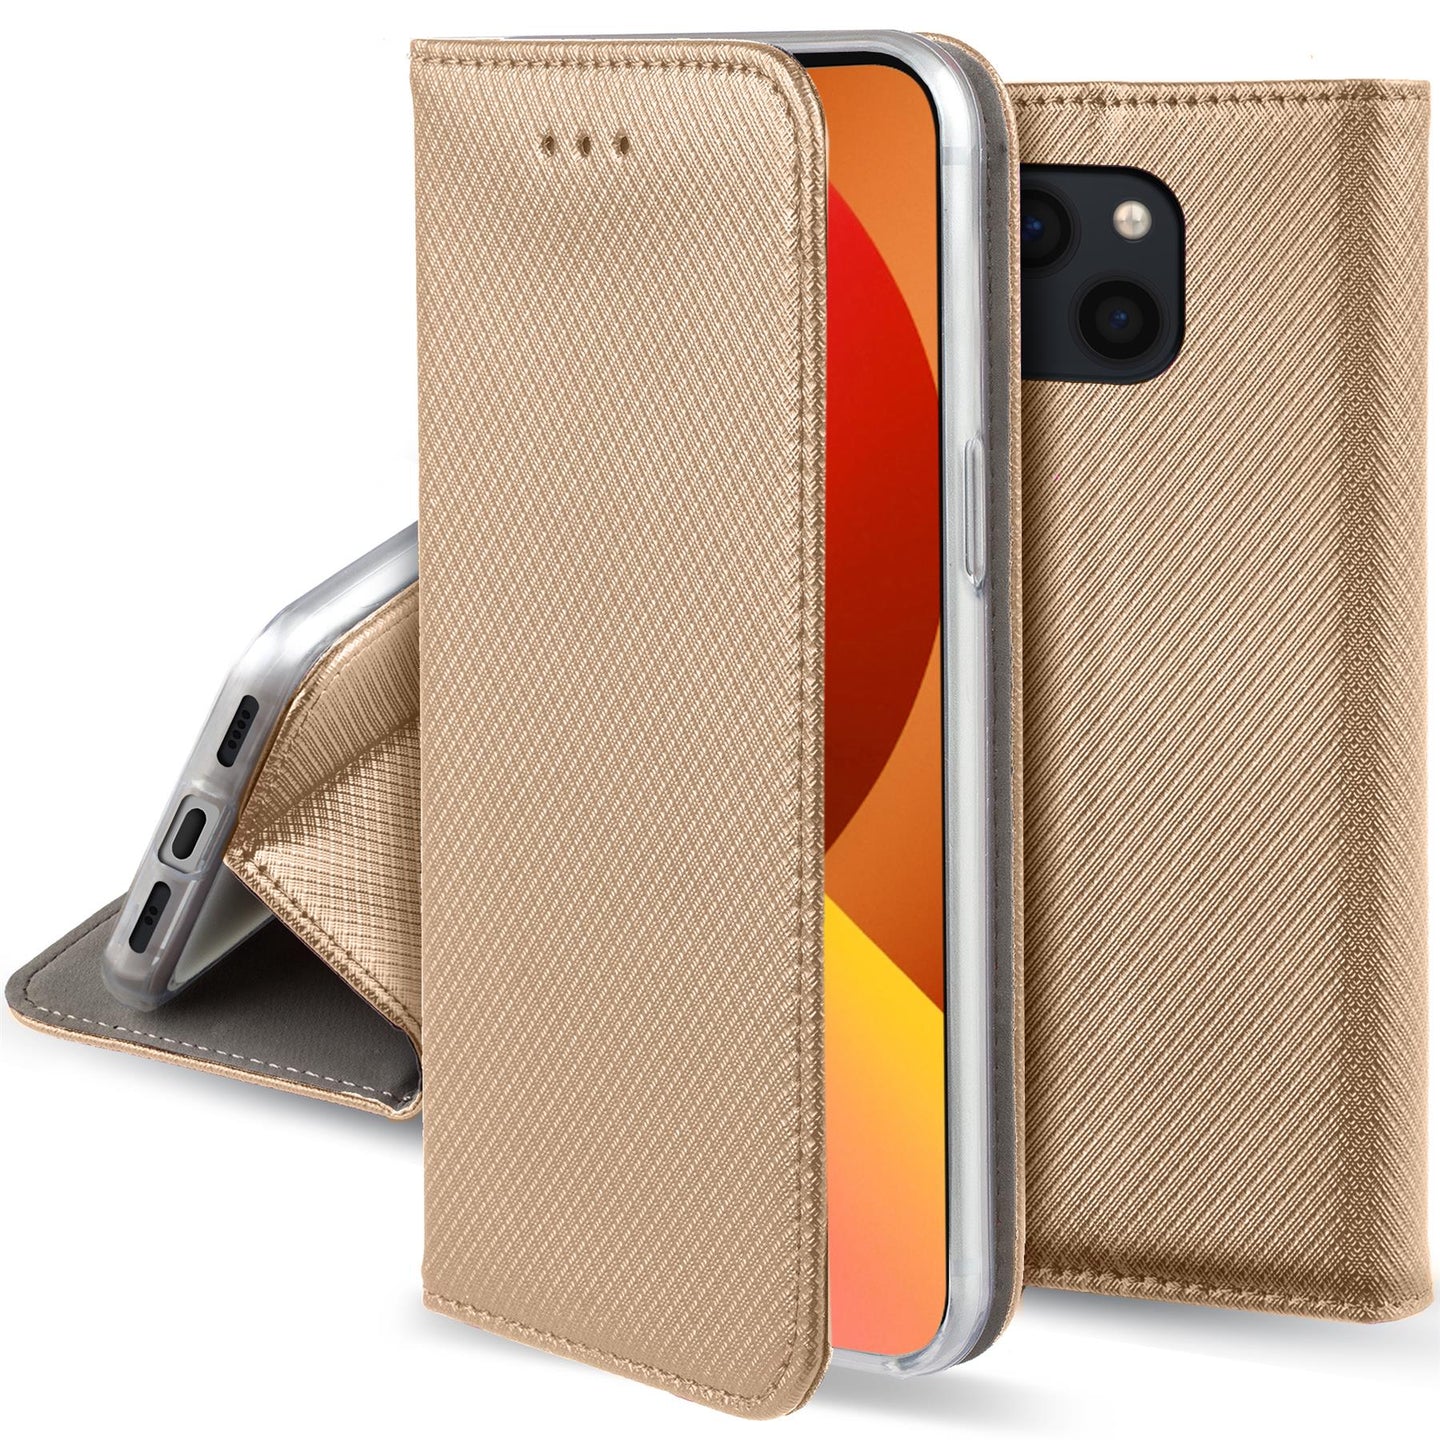 Moozy Case Flip Cover for iPhone 13 Mini, Gold - Smart Magnetic Flip Case Flip Folio Wallet Case with Card Holder and Stand, Credit Card Slots10,99